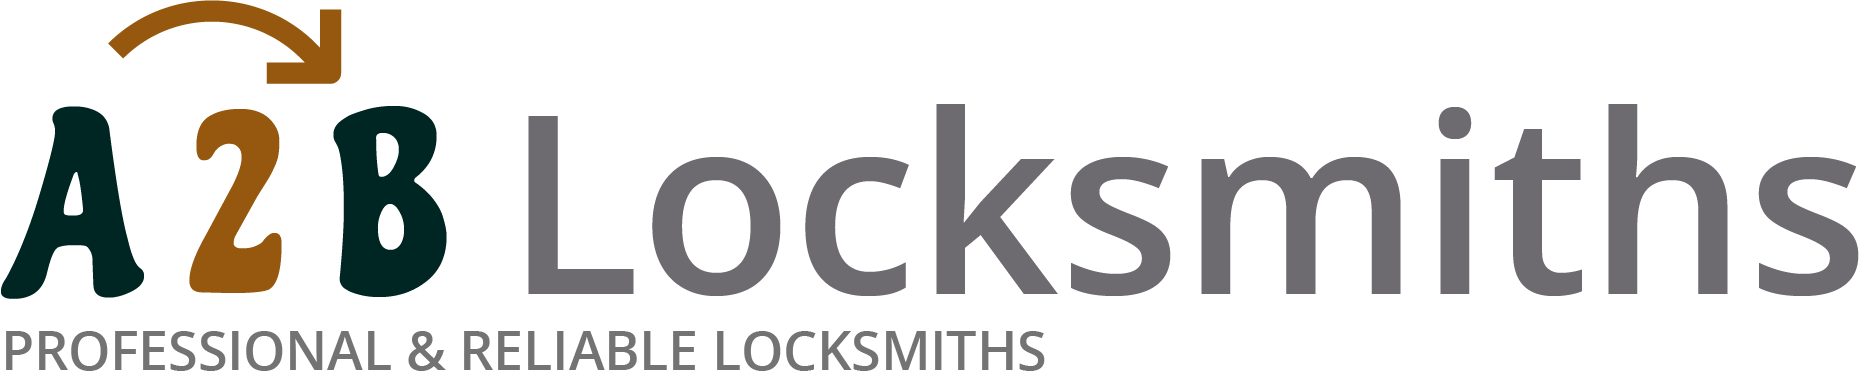 If you are locked out of house in Amersham, our 24/7 local emergency locksmith services can help you.